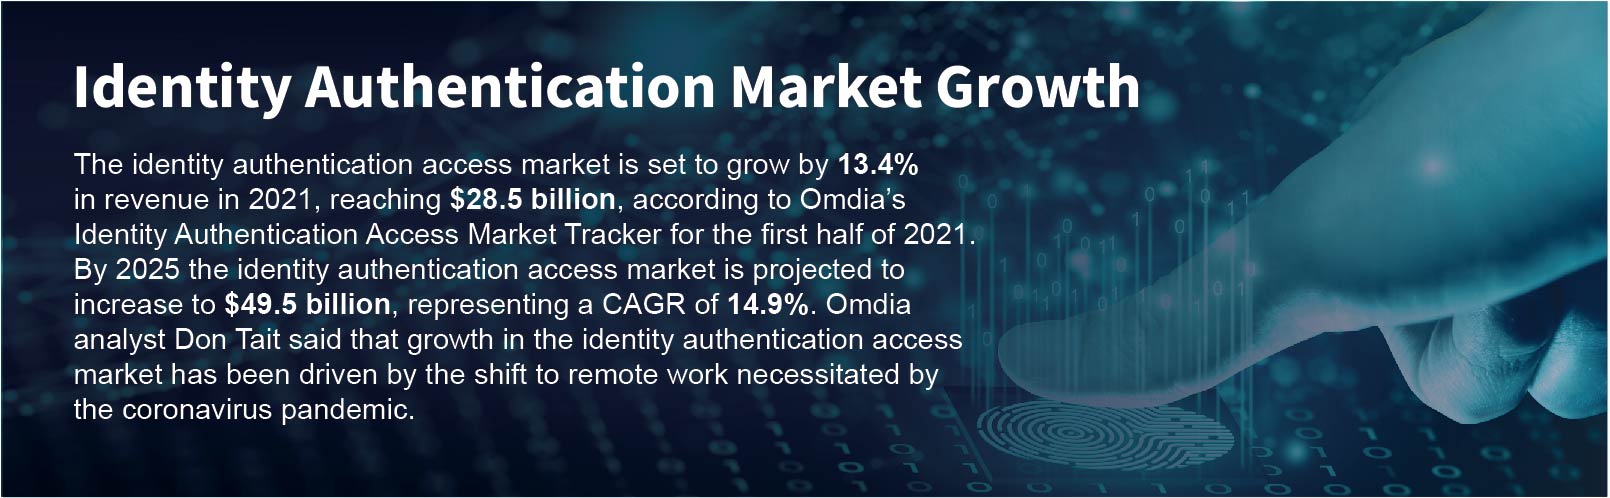 Identity authentication market growth figures presented on ITPro Today